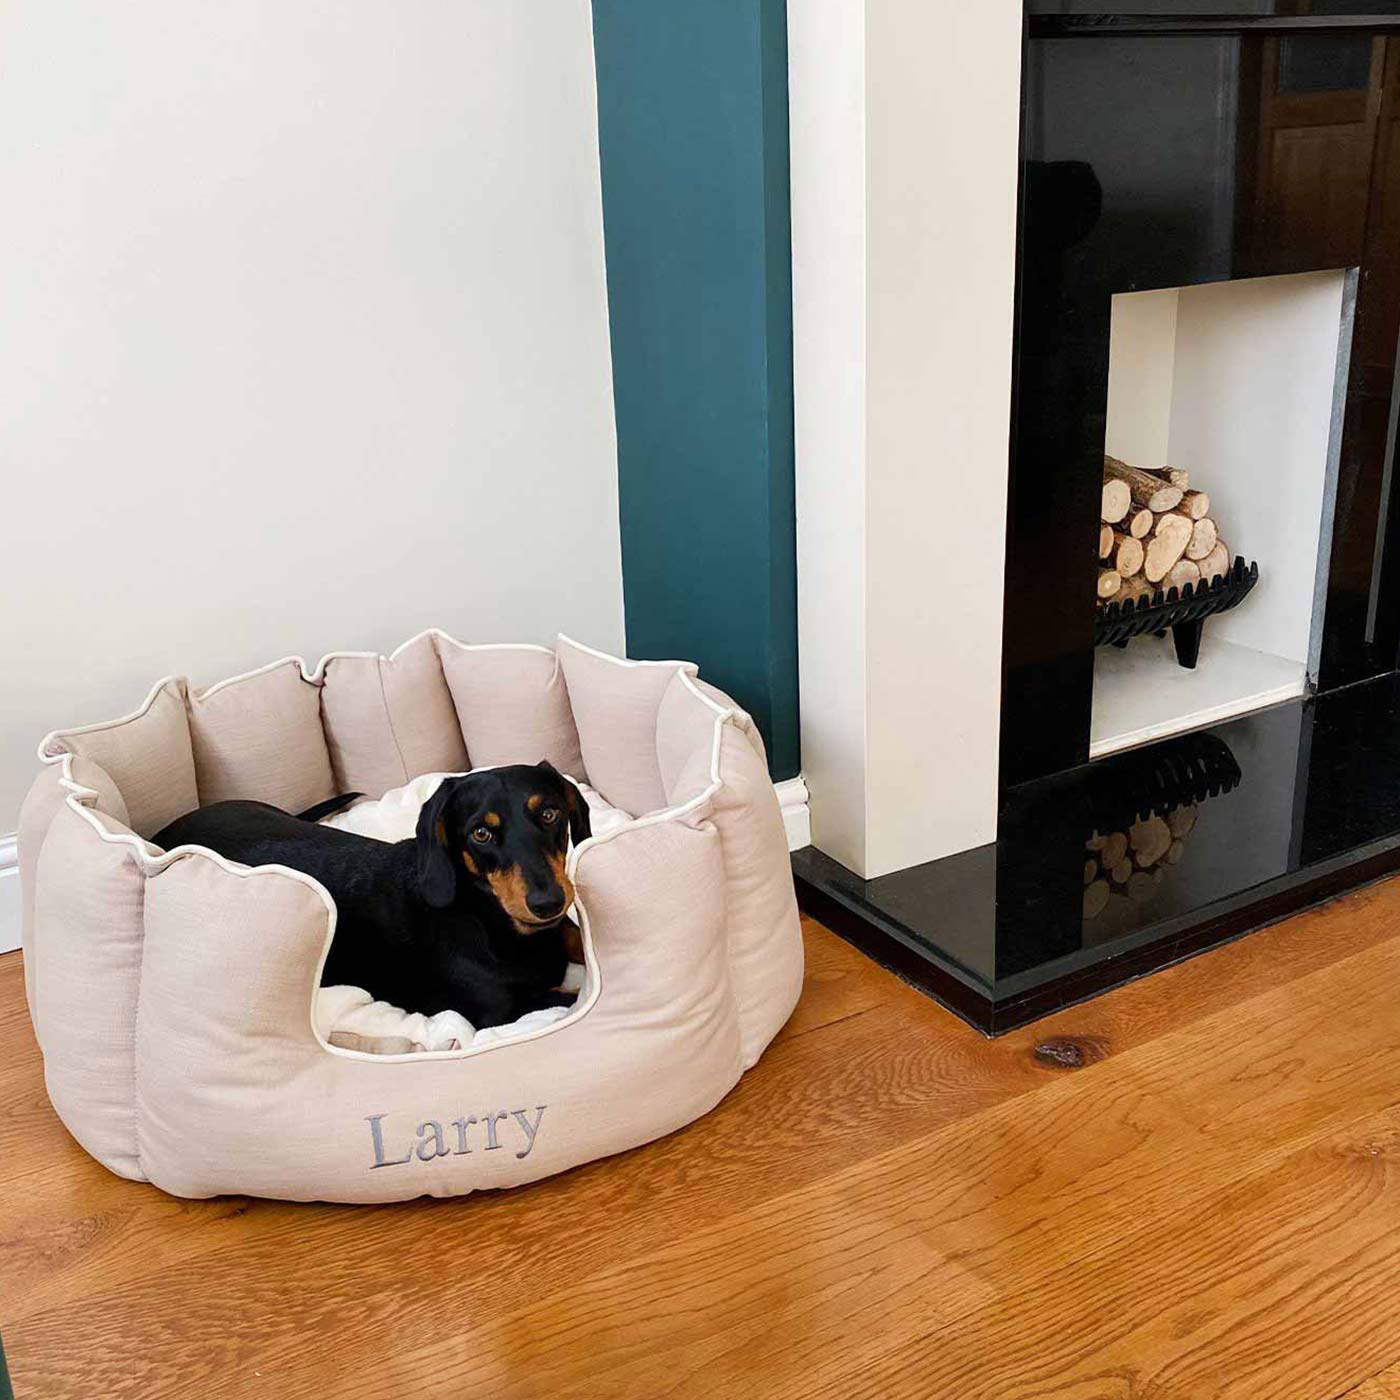 [color:savanna oatmeal] Discover Our Luxurious High Wall Bed For Dogs, Featuring inner pillow with plush teddy fleece on one side To Craft The Perfect Dogs Bed In Stunning Savanna Oatmeal! Available To Personalize Now at Lords & Labradors US